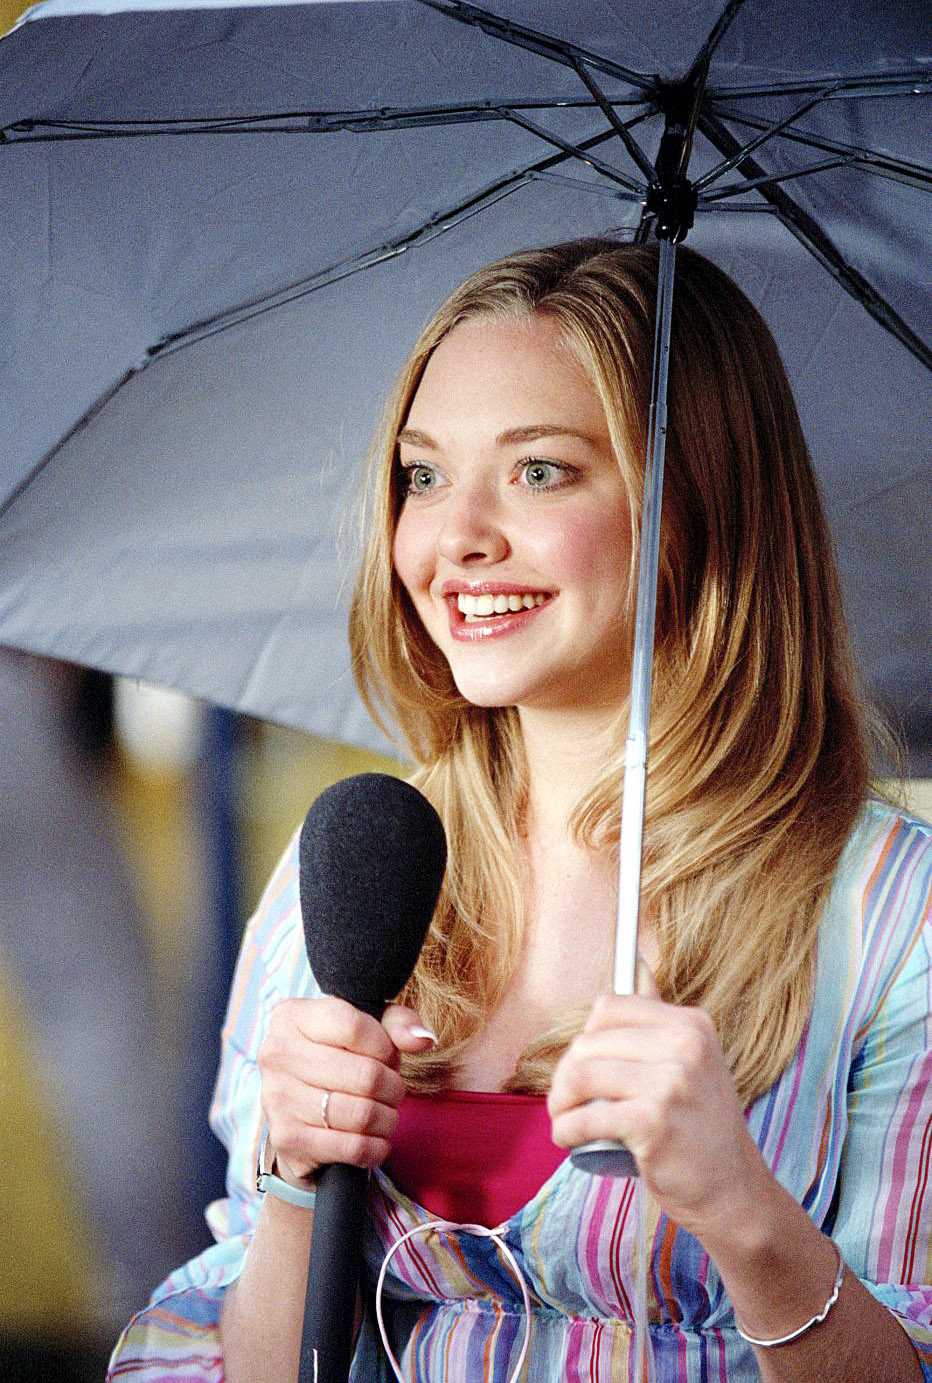 her character holding a mic and an umbrella